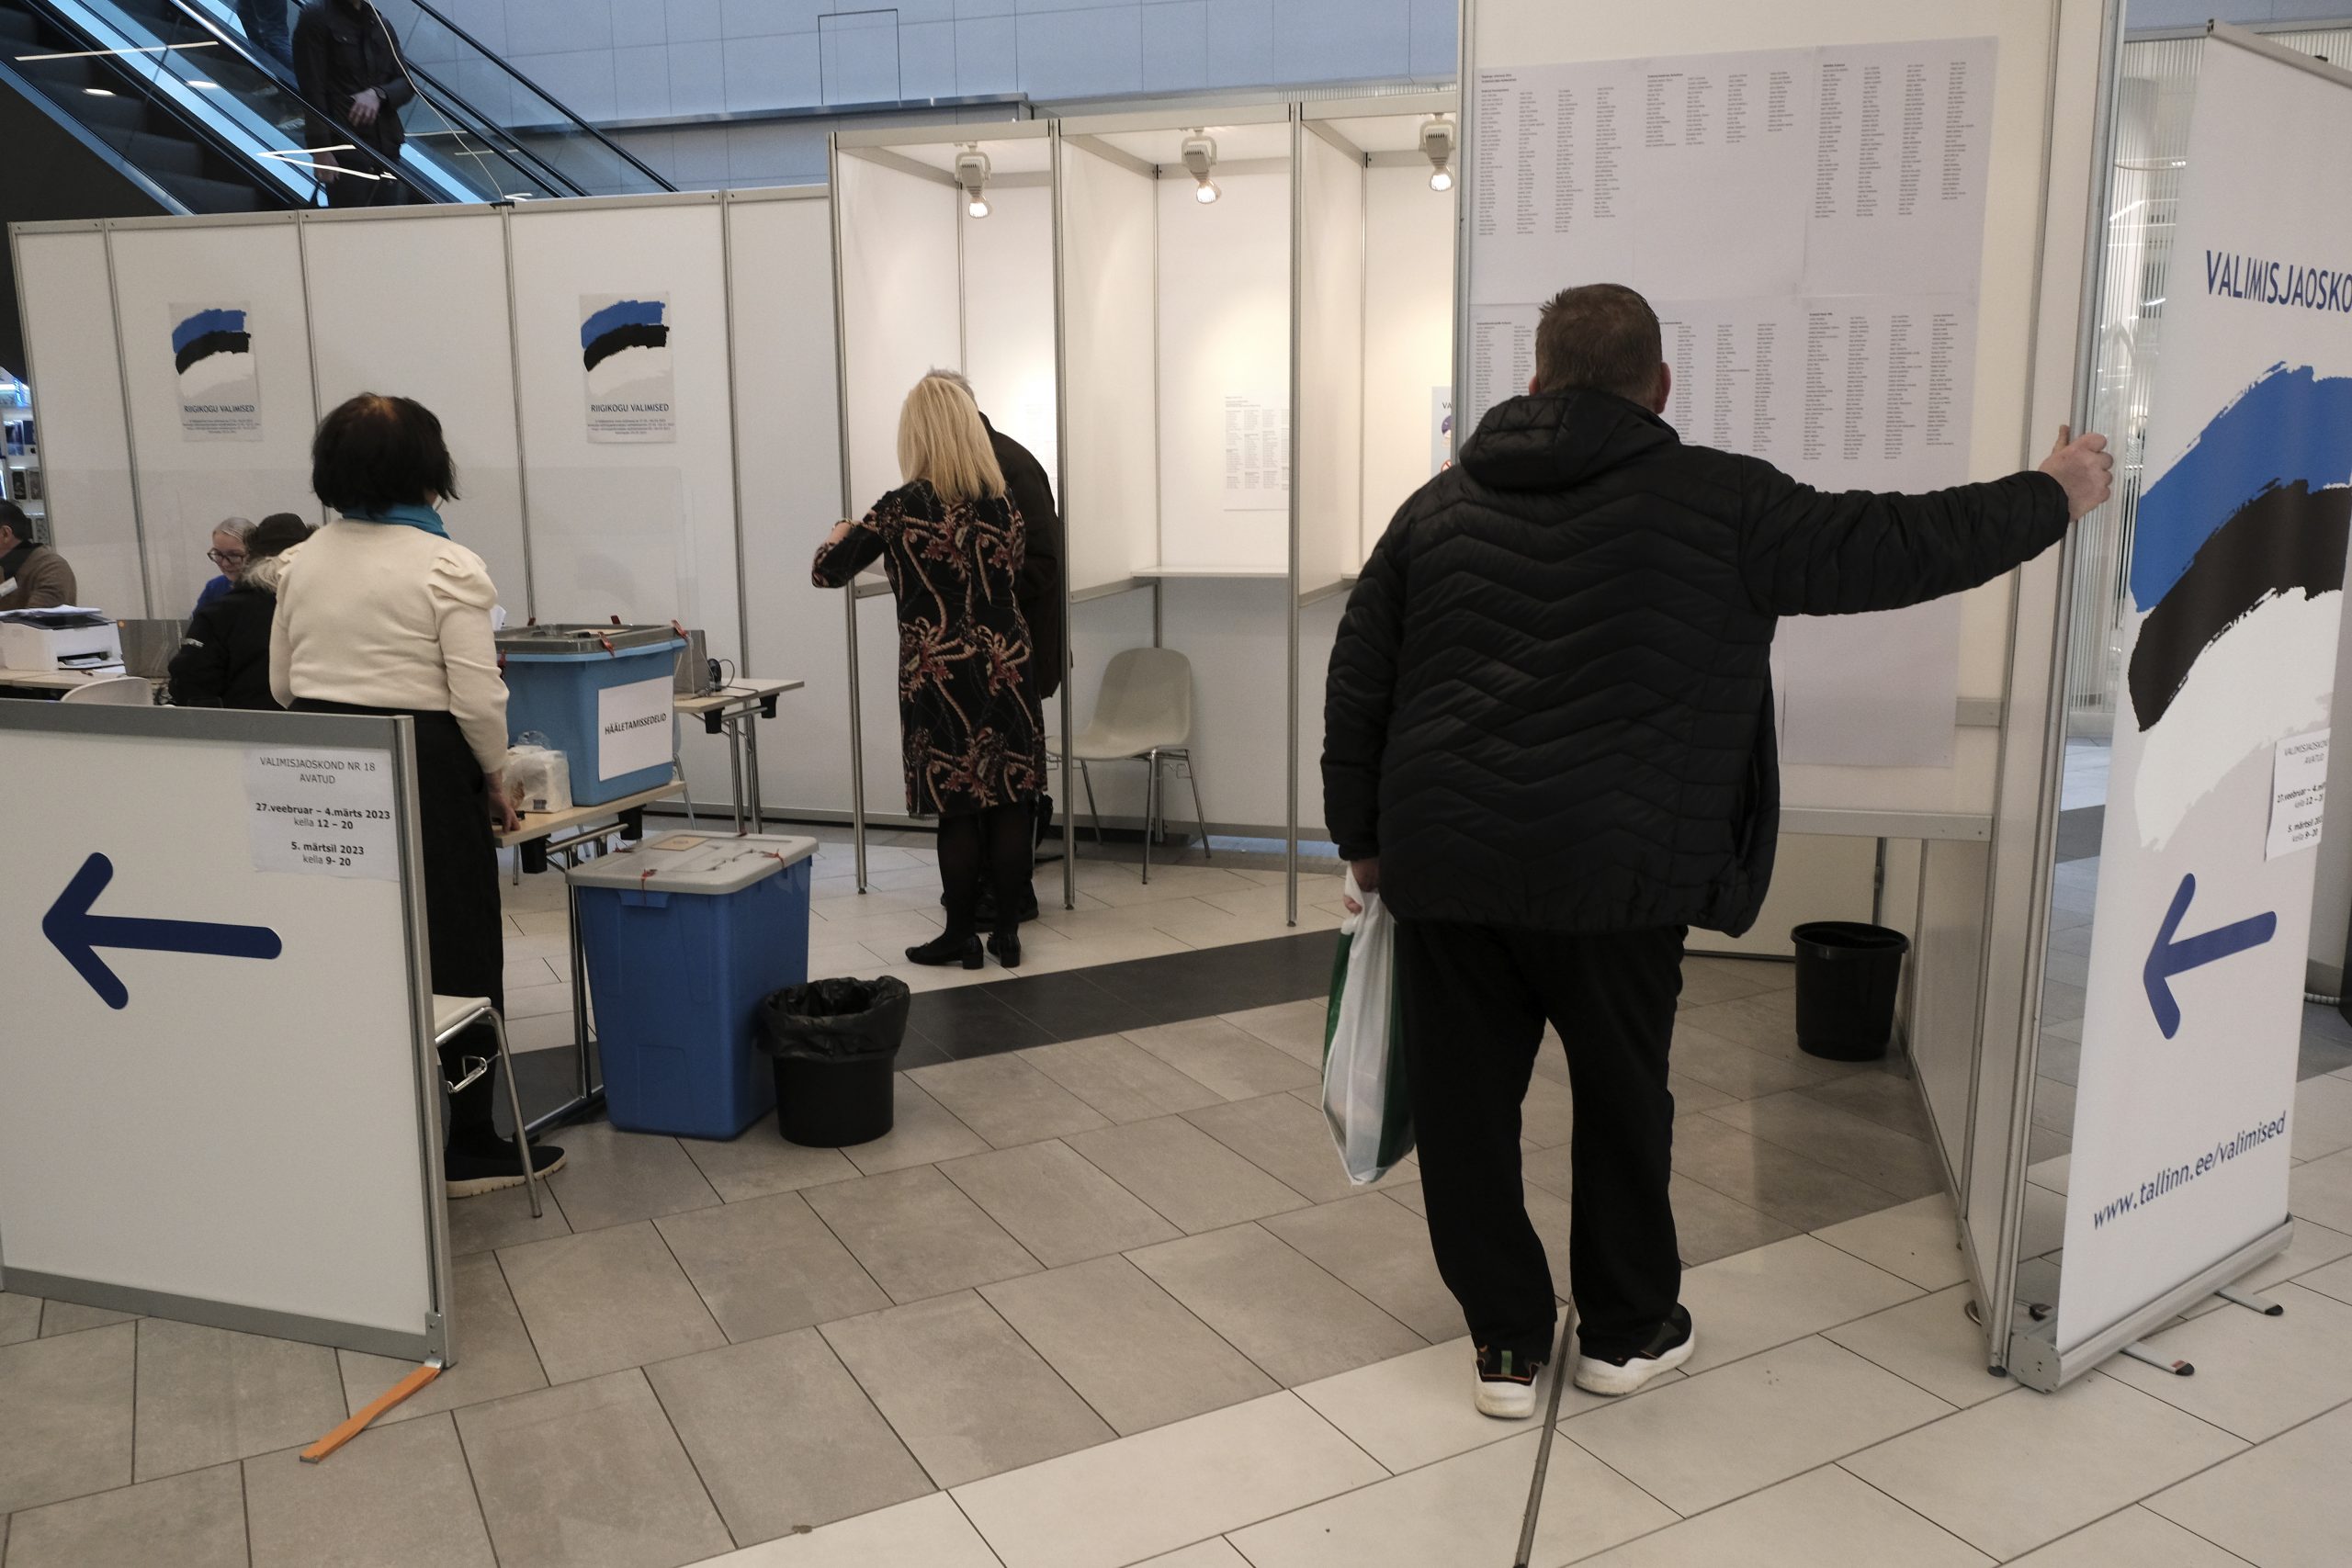 epa10497001 People take part in advance voting in the Estonian parliamenr (Riigikogu) at the polling station in a shopping mall in Tallinn, Estonia, 01 March 2023. Parliamentary elections will be held in Estonia on 5 March 2023 to elect all 101 members of the Riigikogu.  EPA/VALDA KALNINA